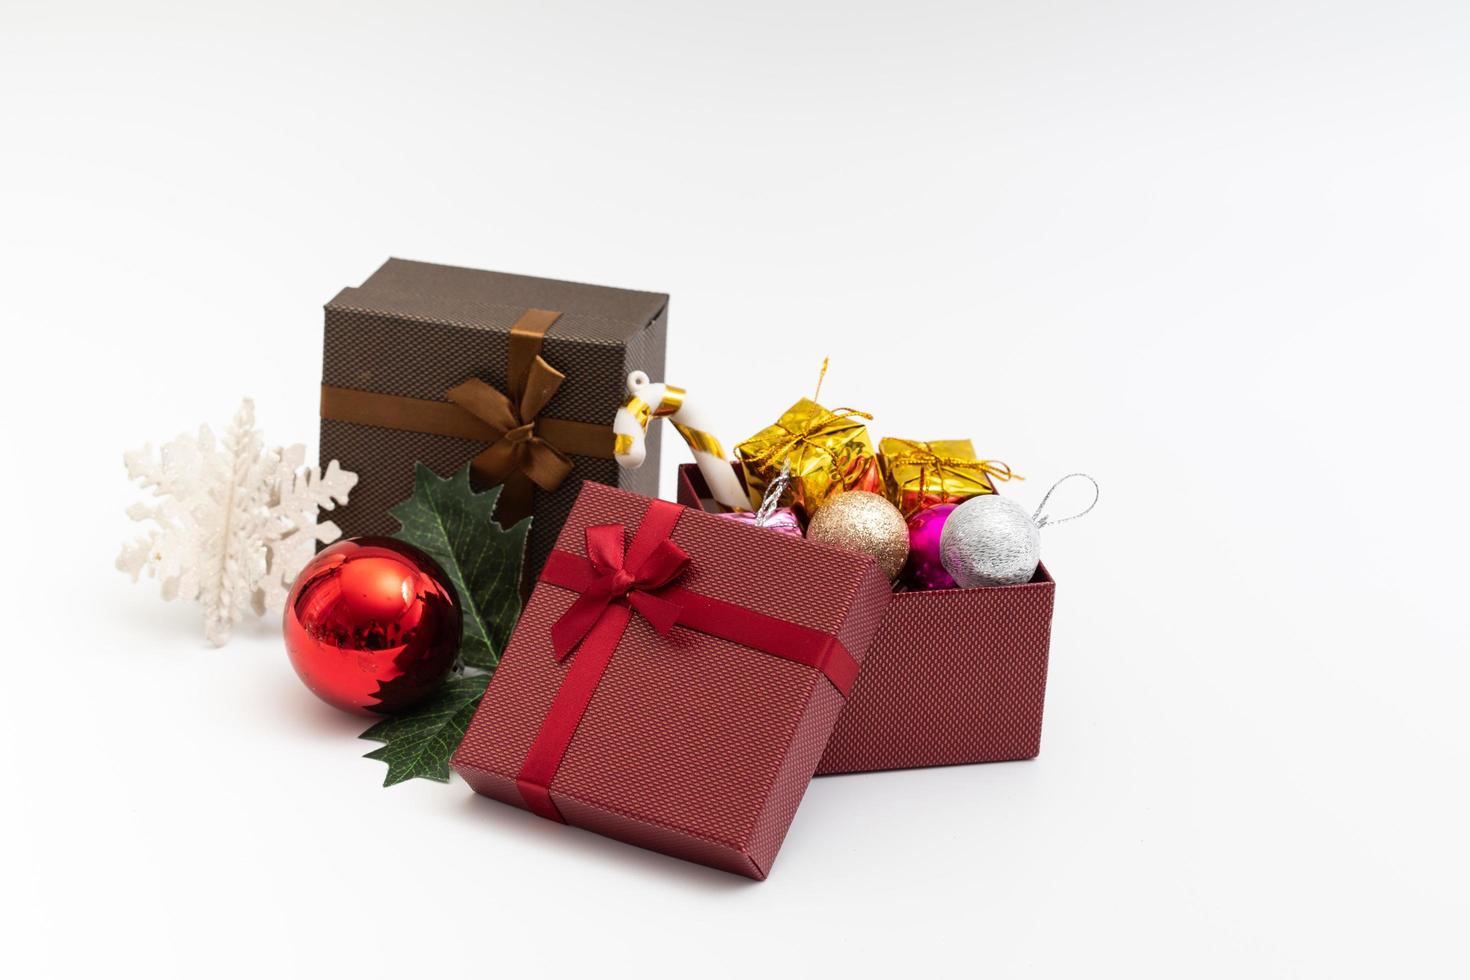 present box with color ribbon on white background photo